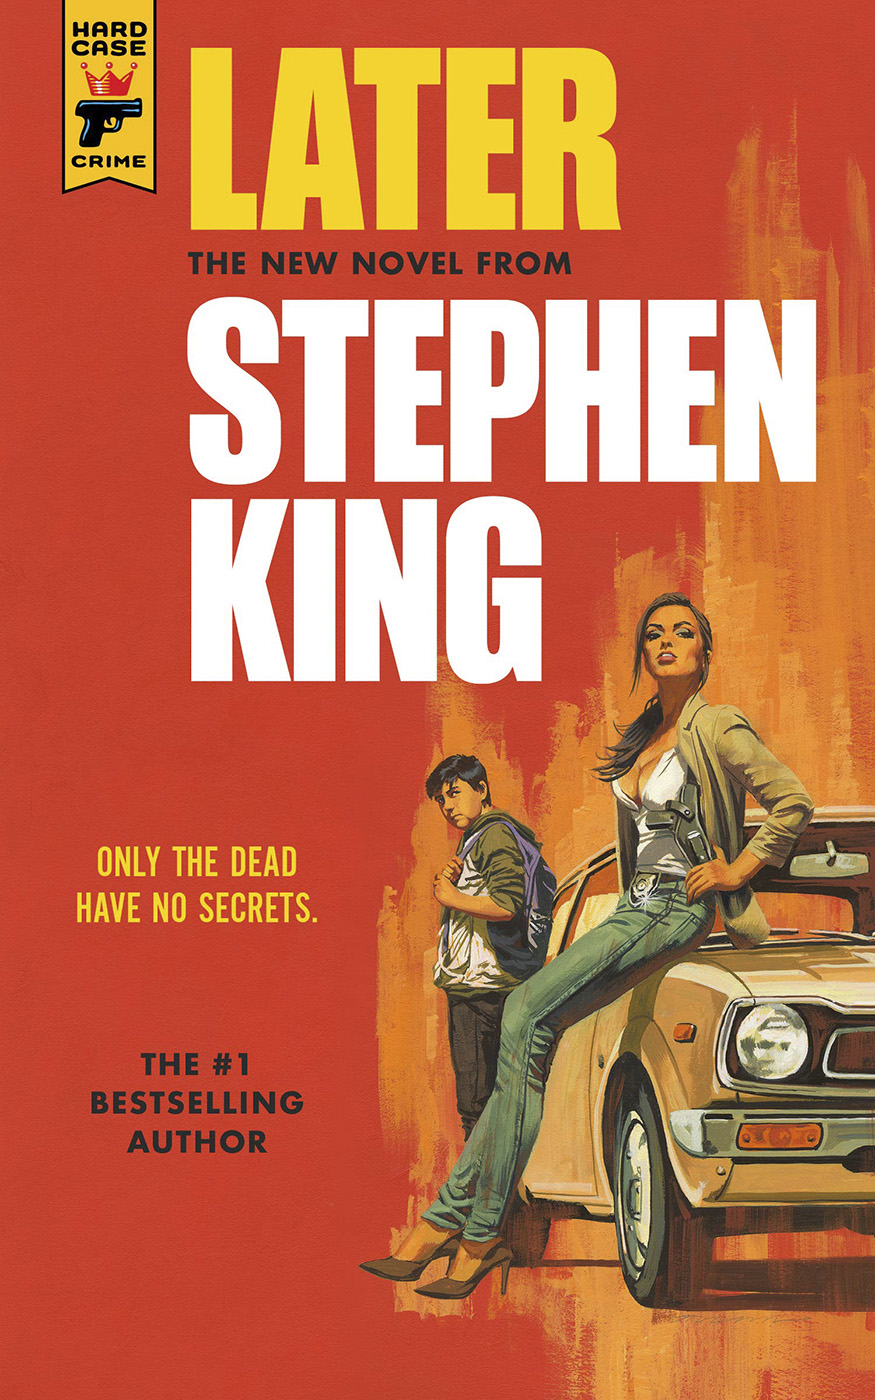 What are some Stephen King books with elements of the supernatural?